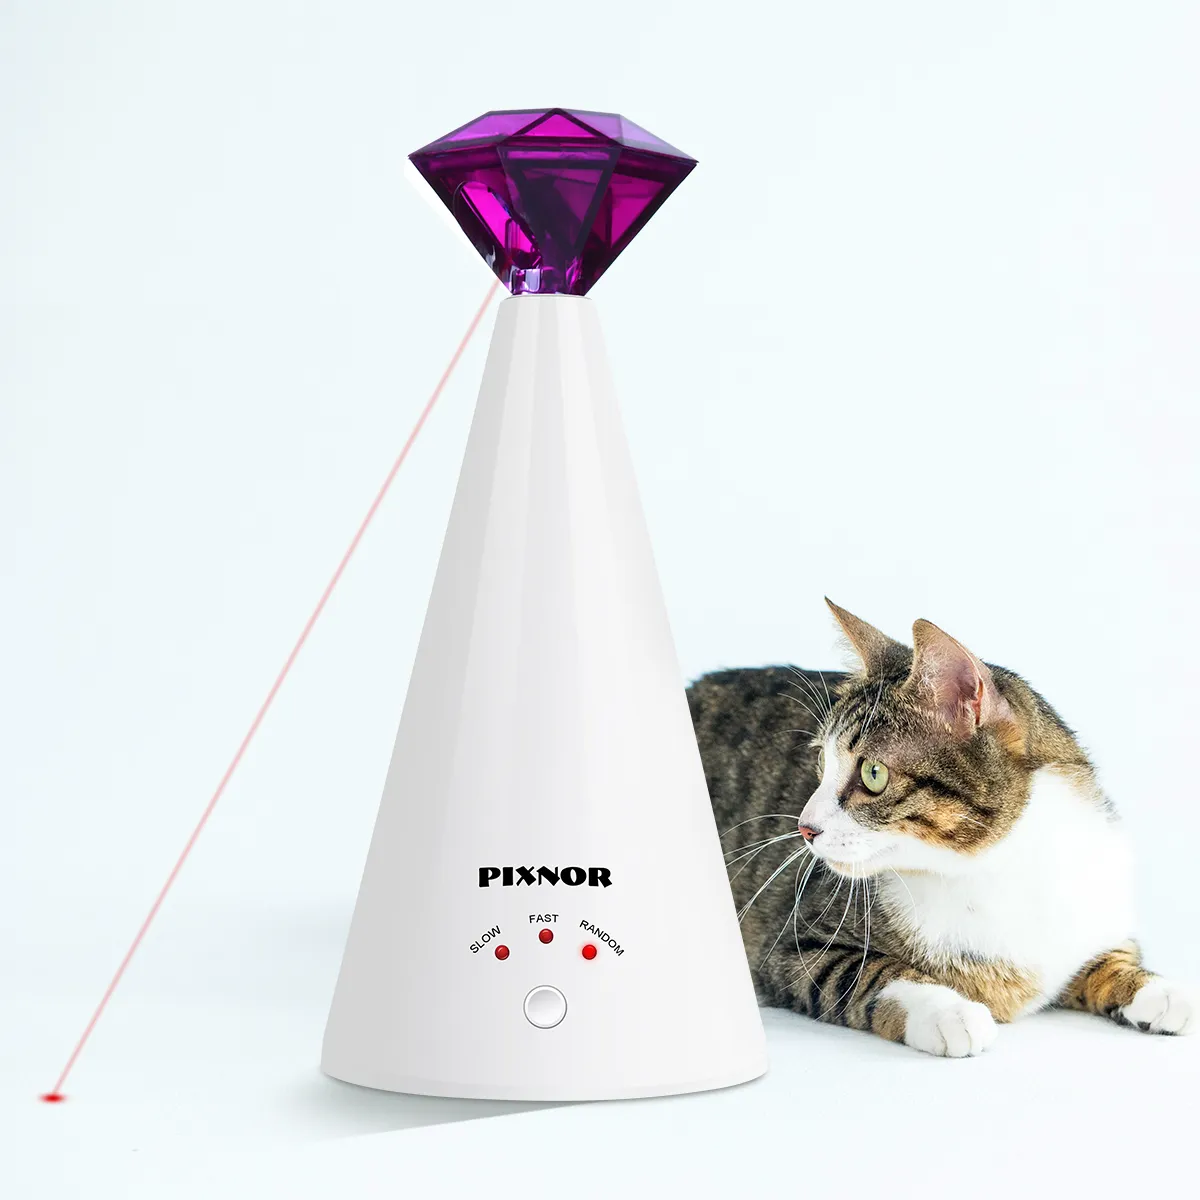 Pixnor Smart Laser Teasing Device Electric Toy Home Interactive Cat調整可能3速度ペットポインターパープル2011128337512